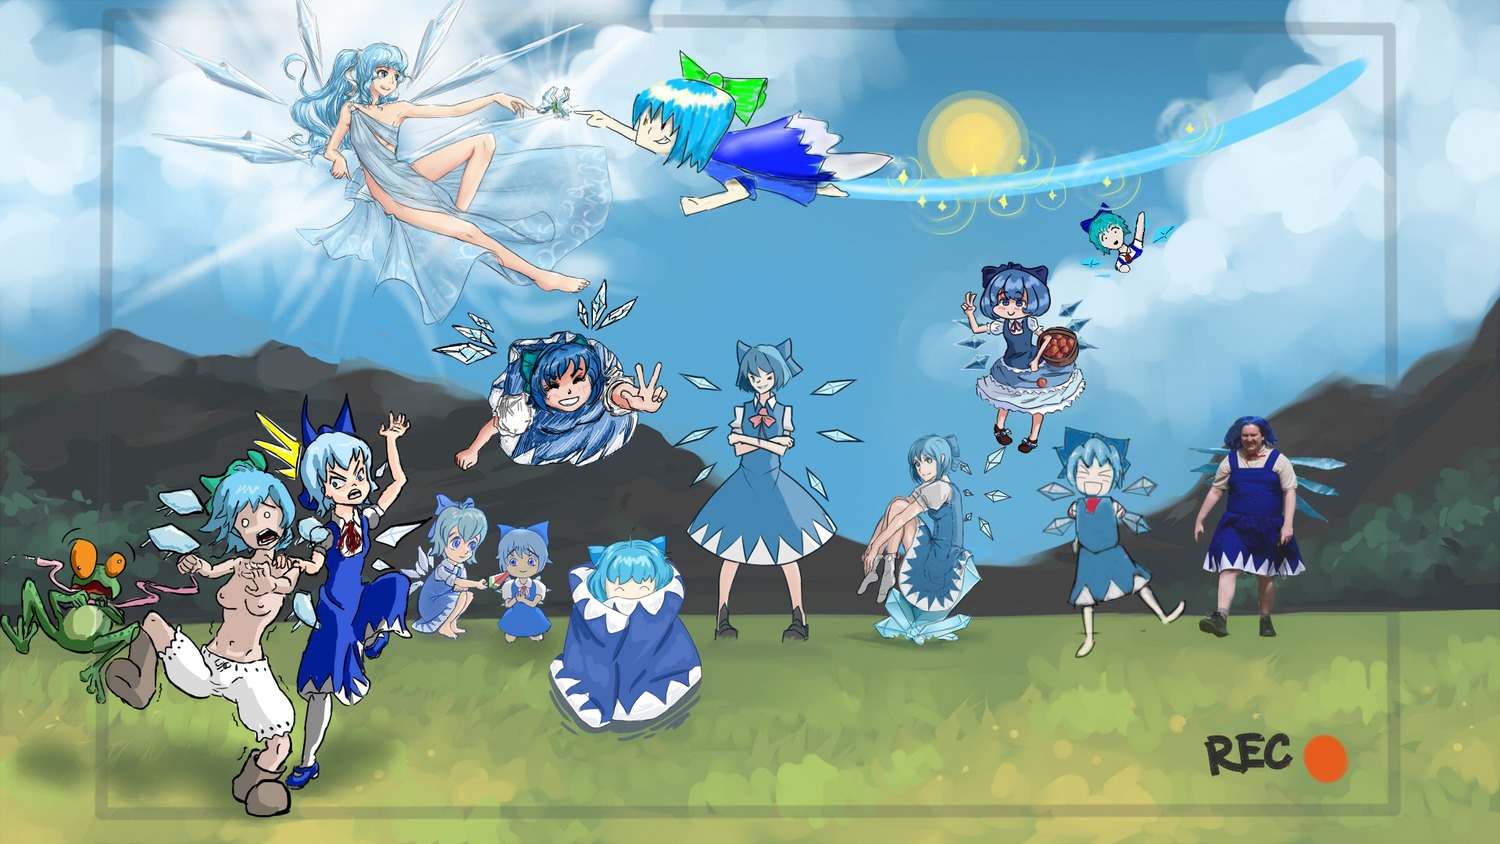 blue_eyes blue_hair bow camera cirno cloud collage dress everyone flying frog frozen_frog multiple_girls multiple_persona outdoors parody photoshop short_hair sky touhou v wallpaper wings